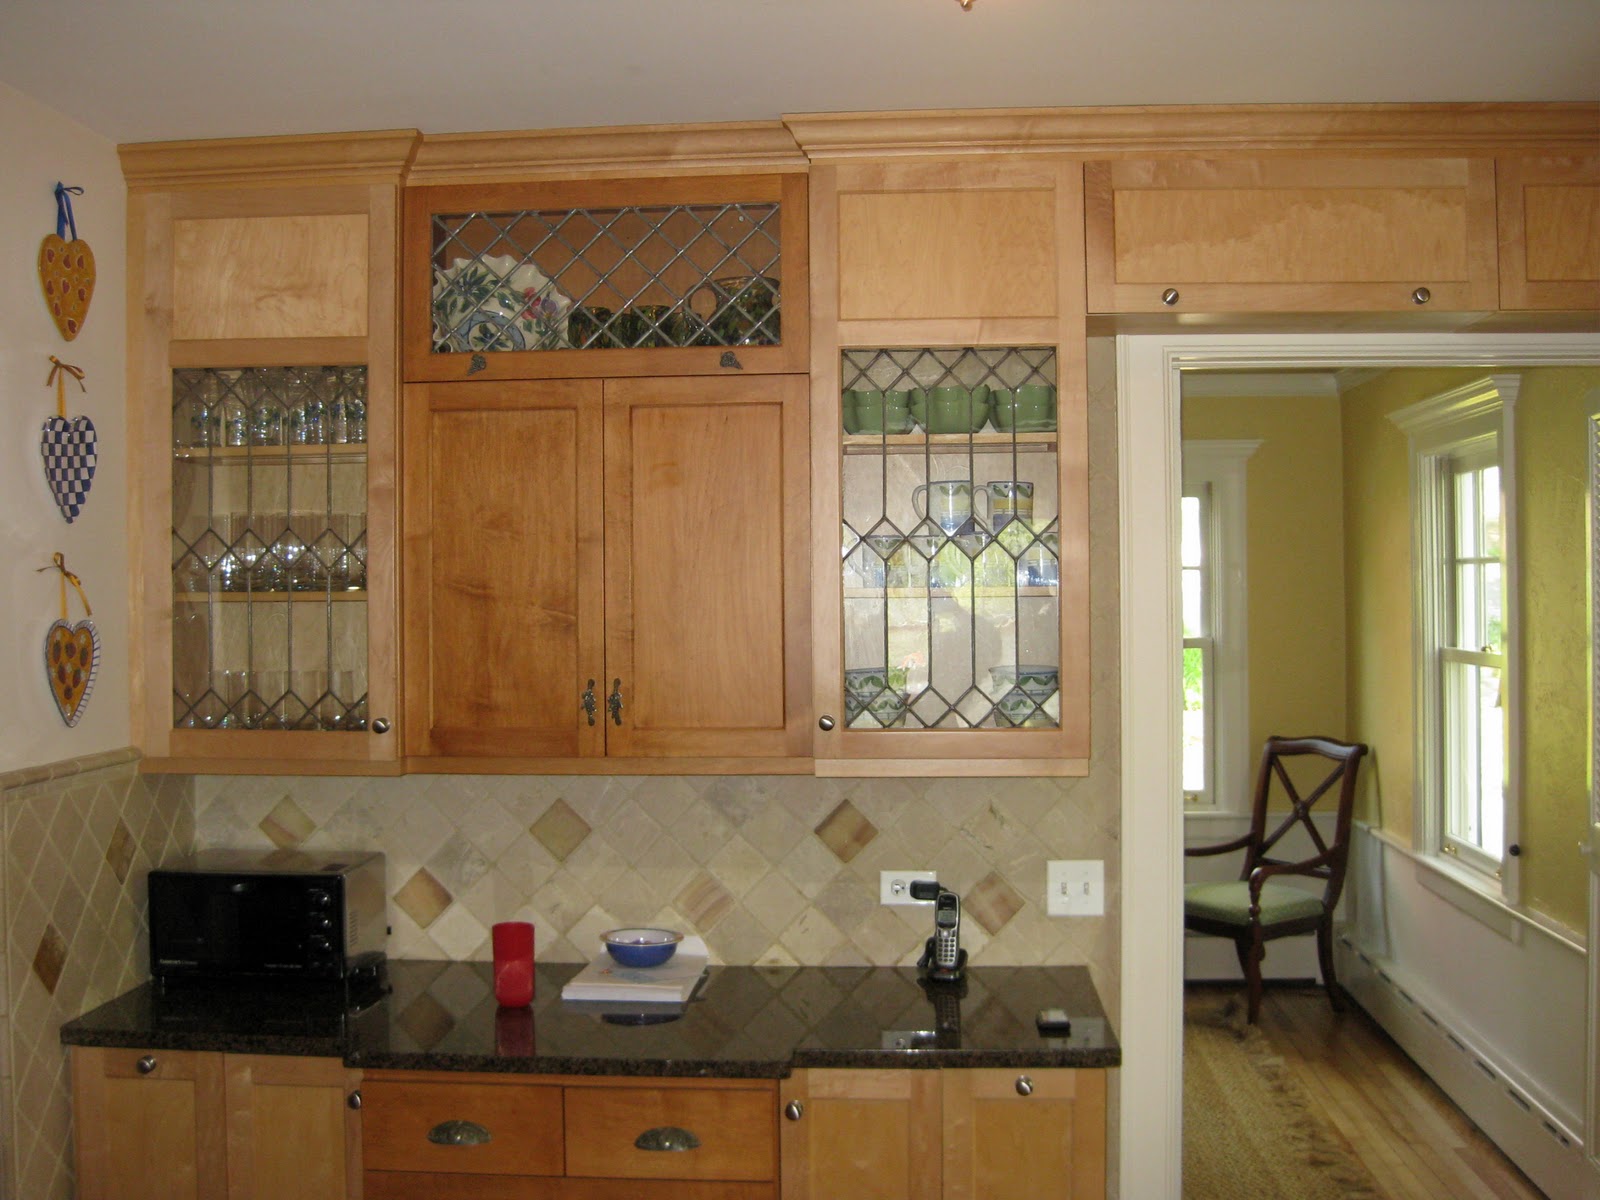 Just*Grand: Fabulous Kitchen Remodeling Project * Before and After!